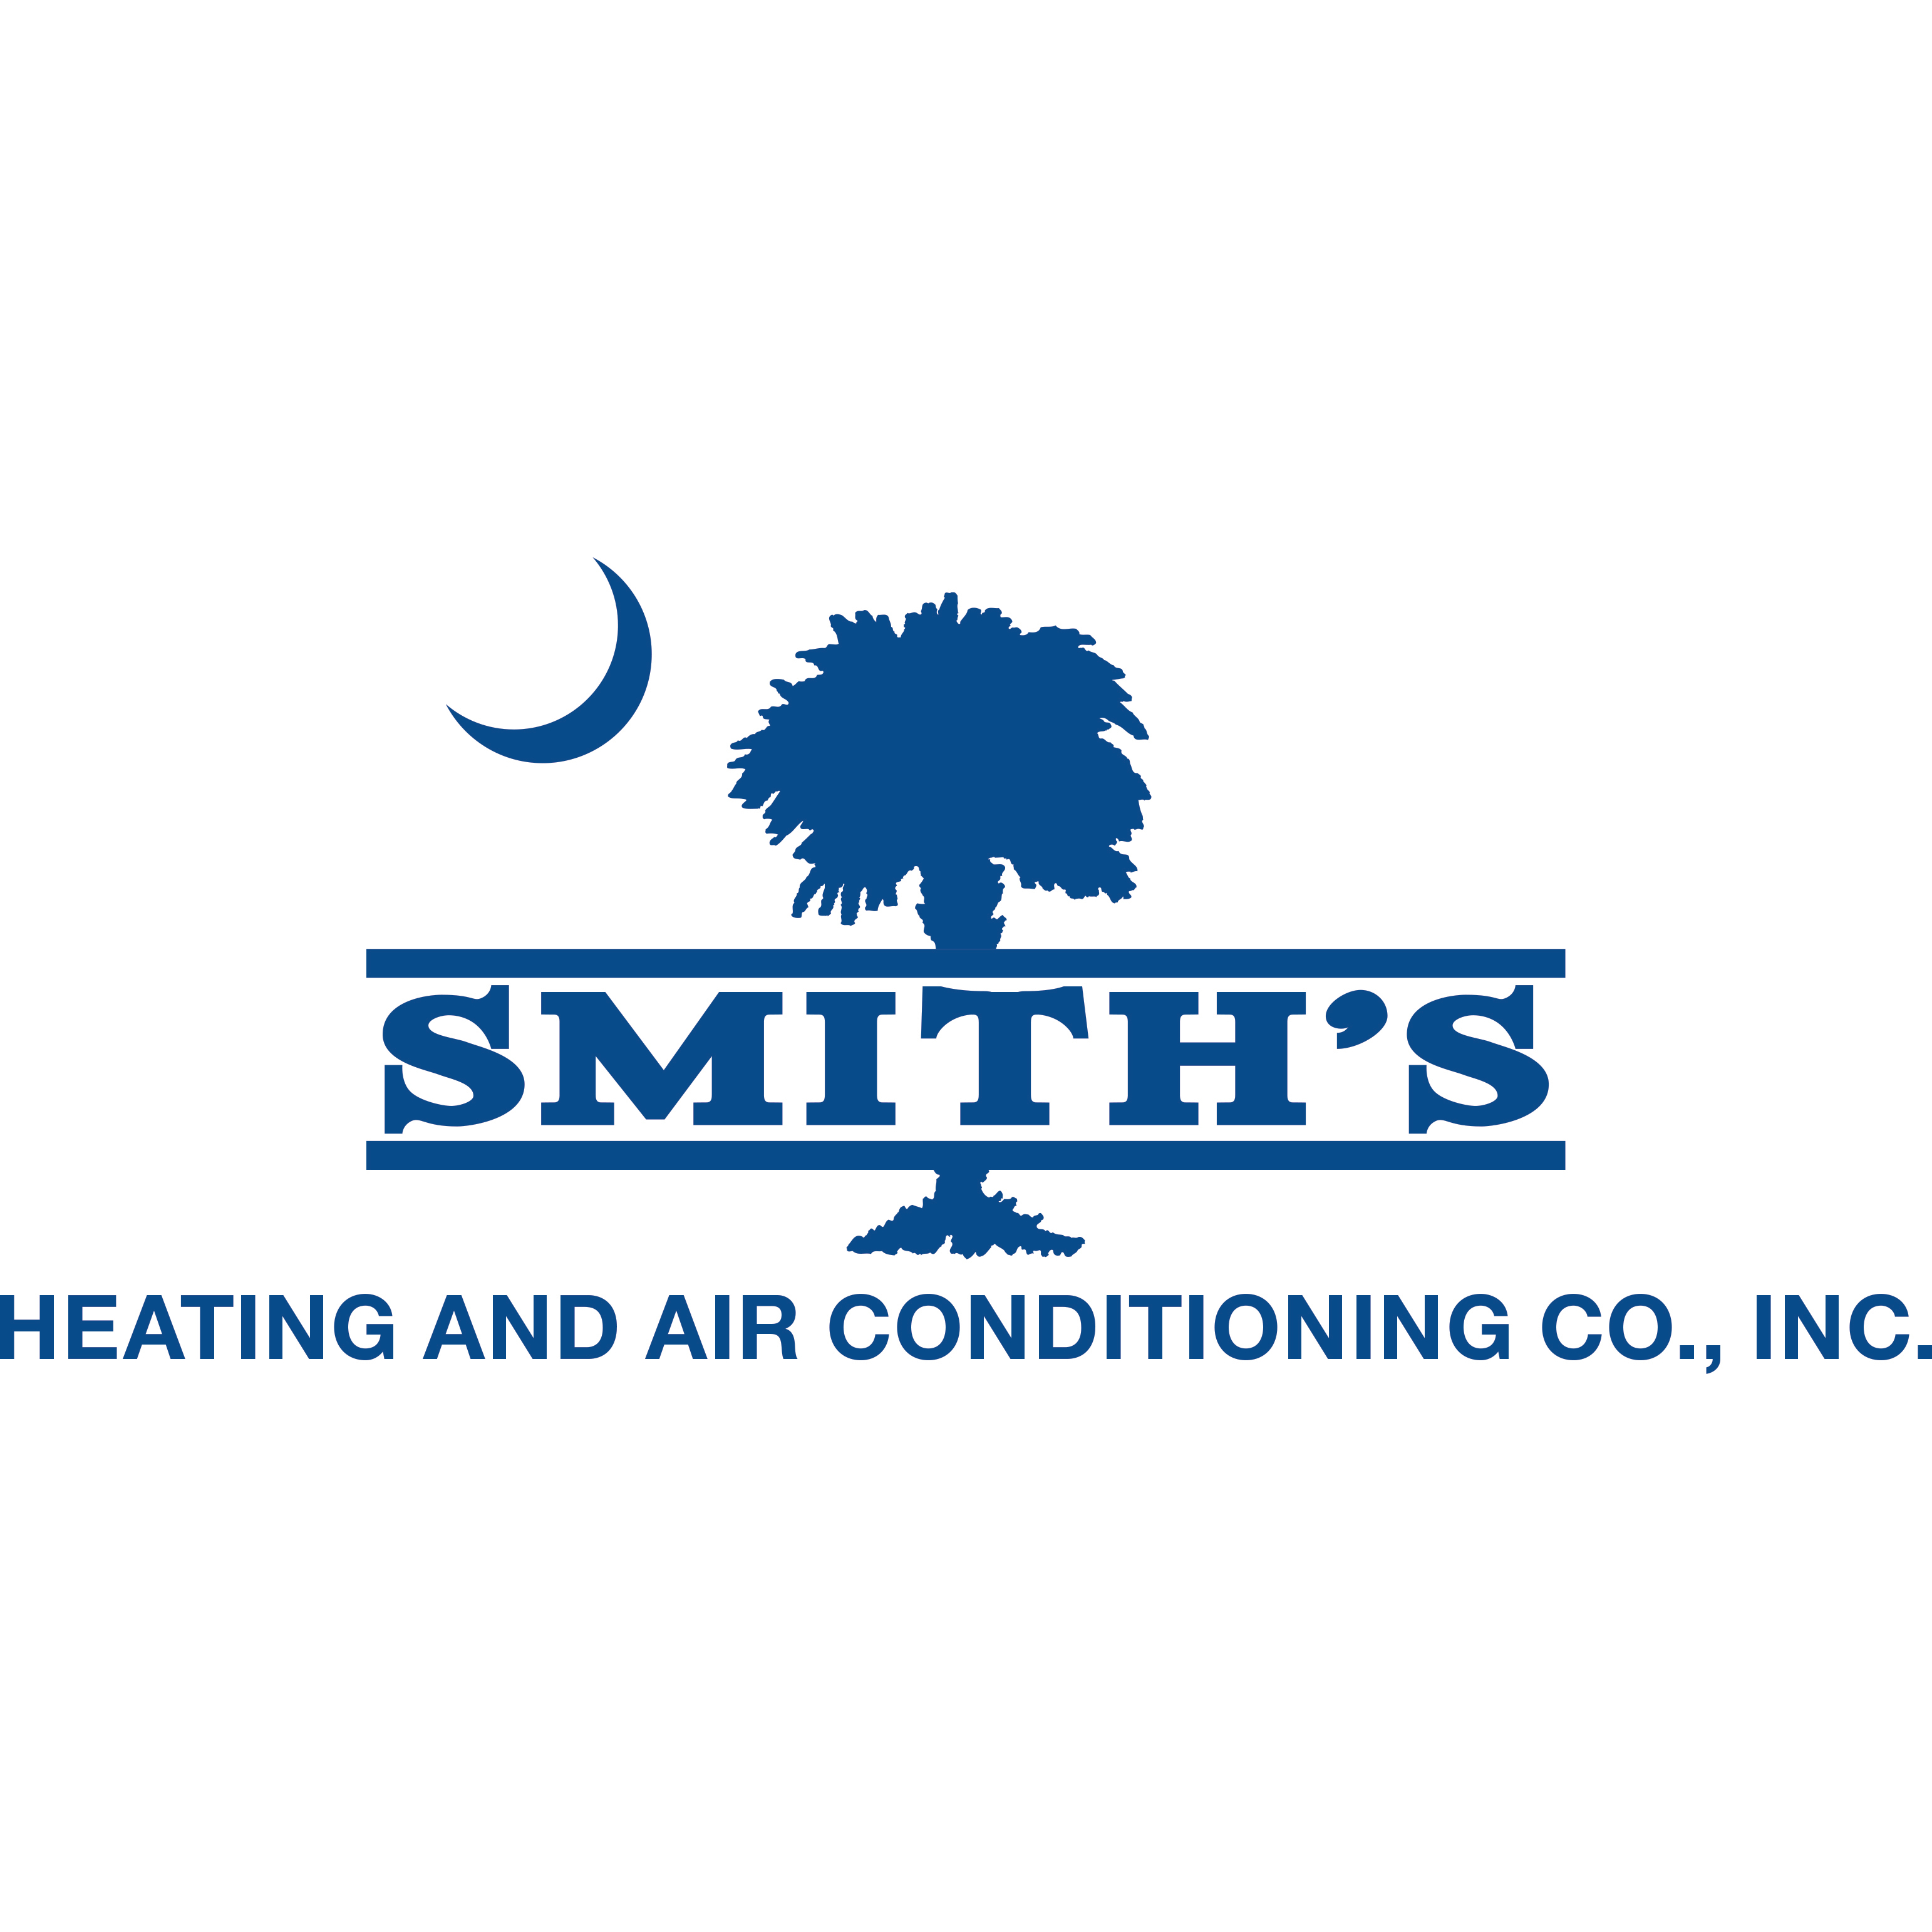 Smith's Heating and Air Conditioning, Inc Logo